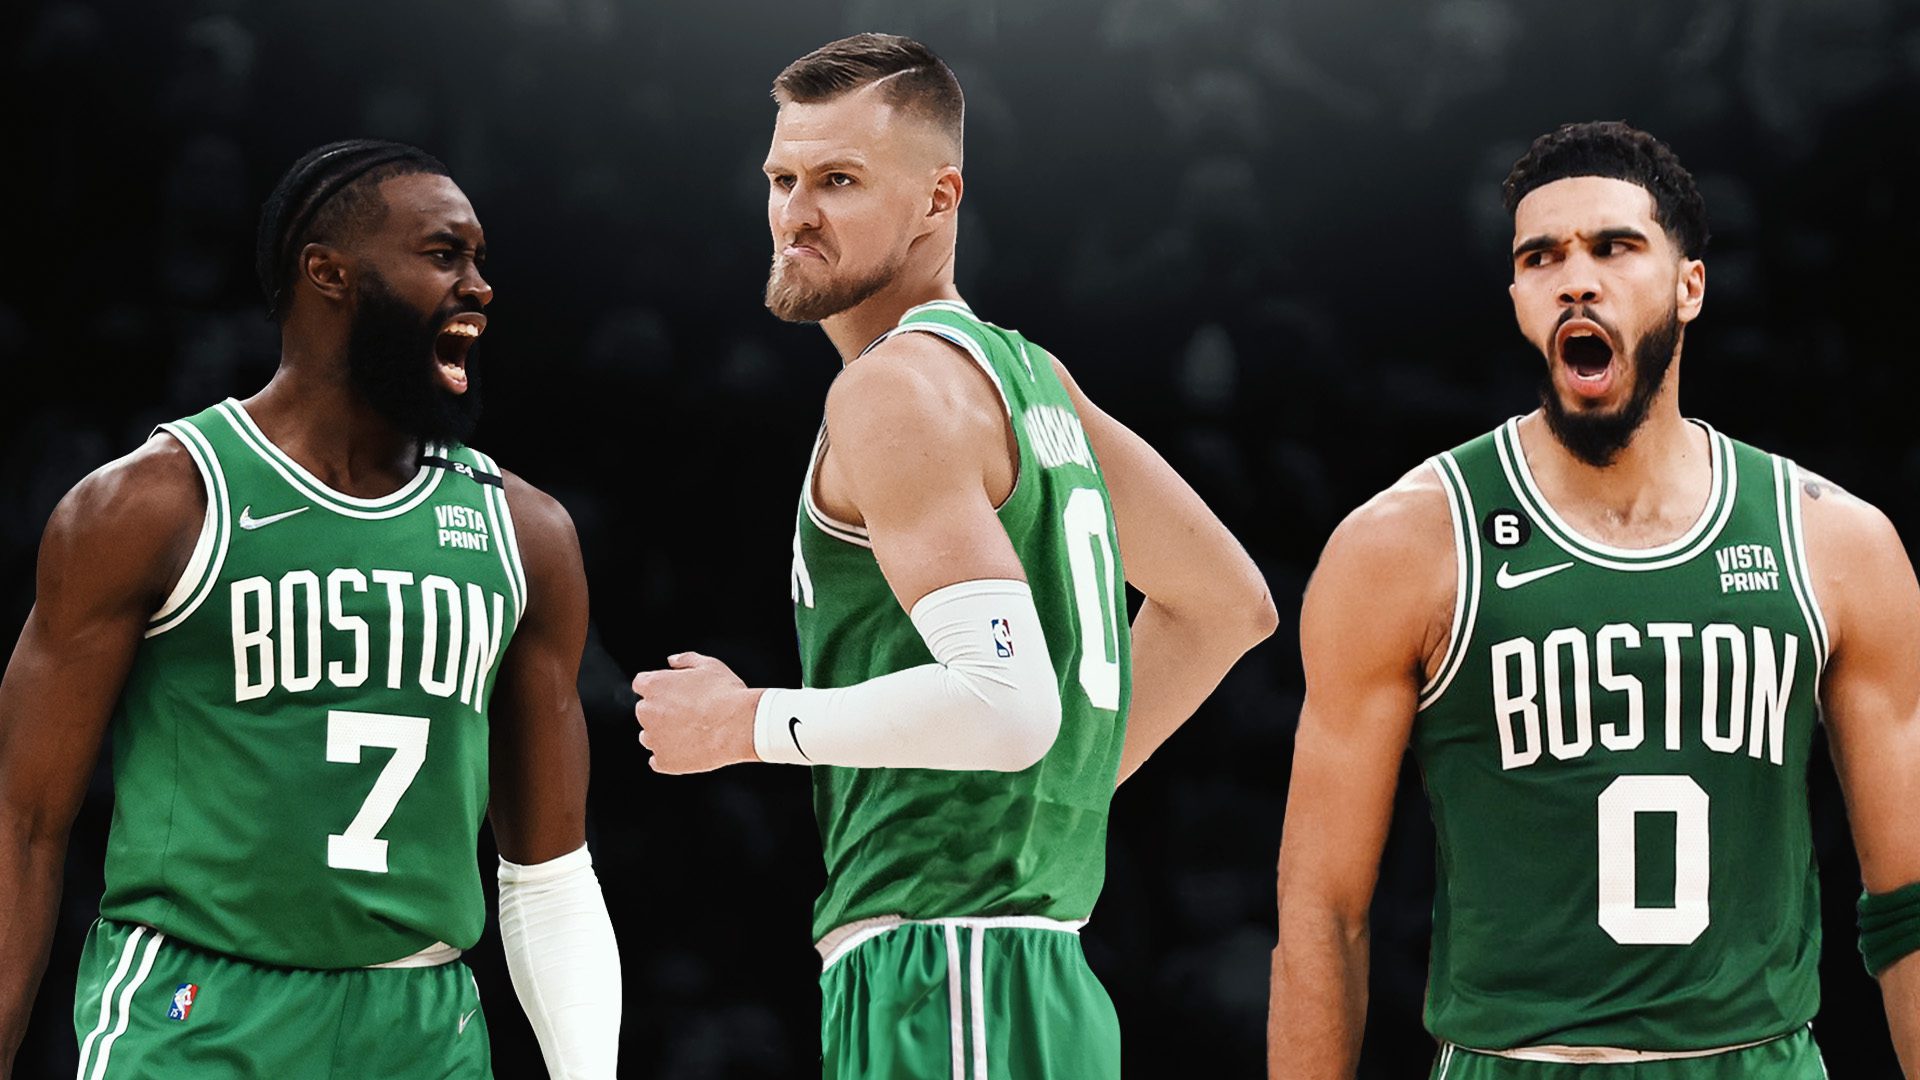 New 36m Boston Celtics star man breaks silence after being traded